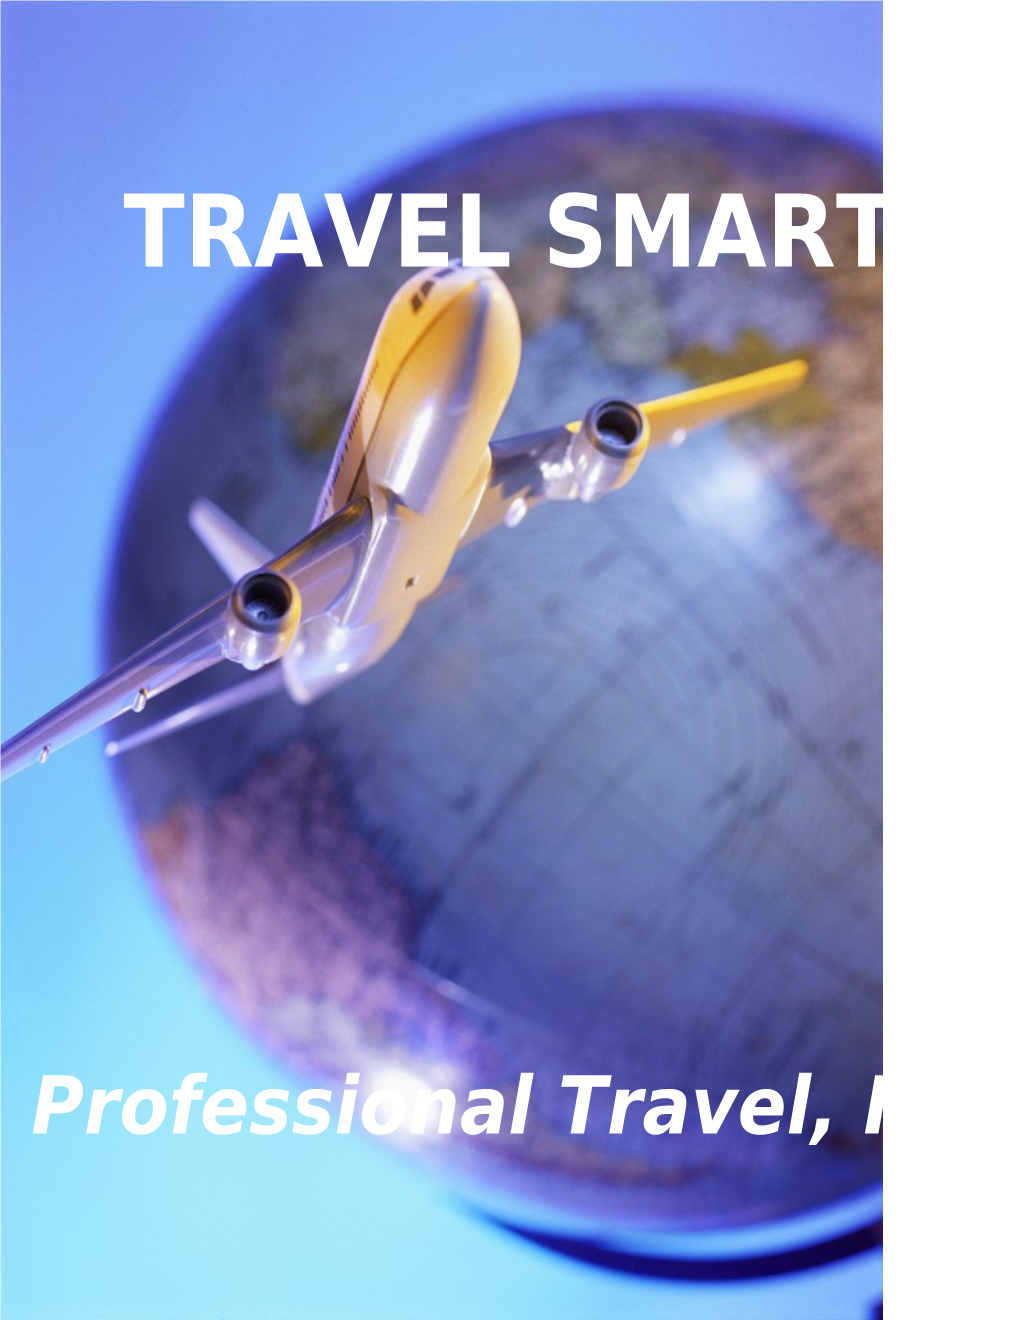 Traveling Safe with Professional Travel